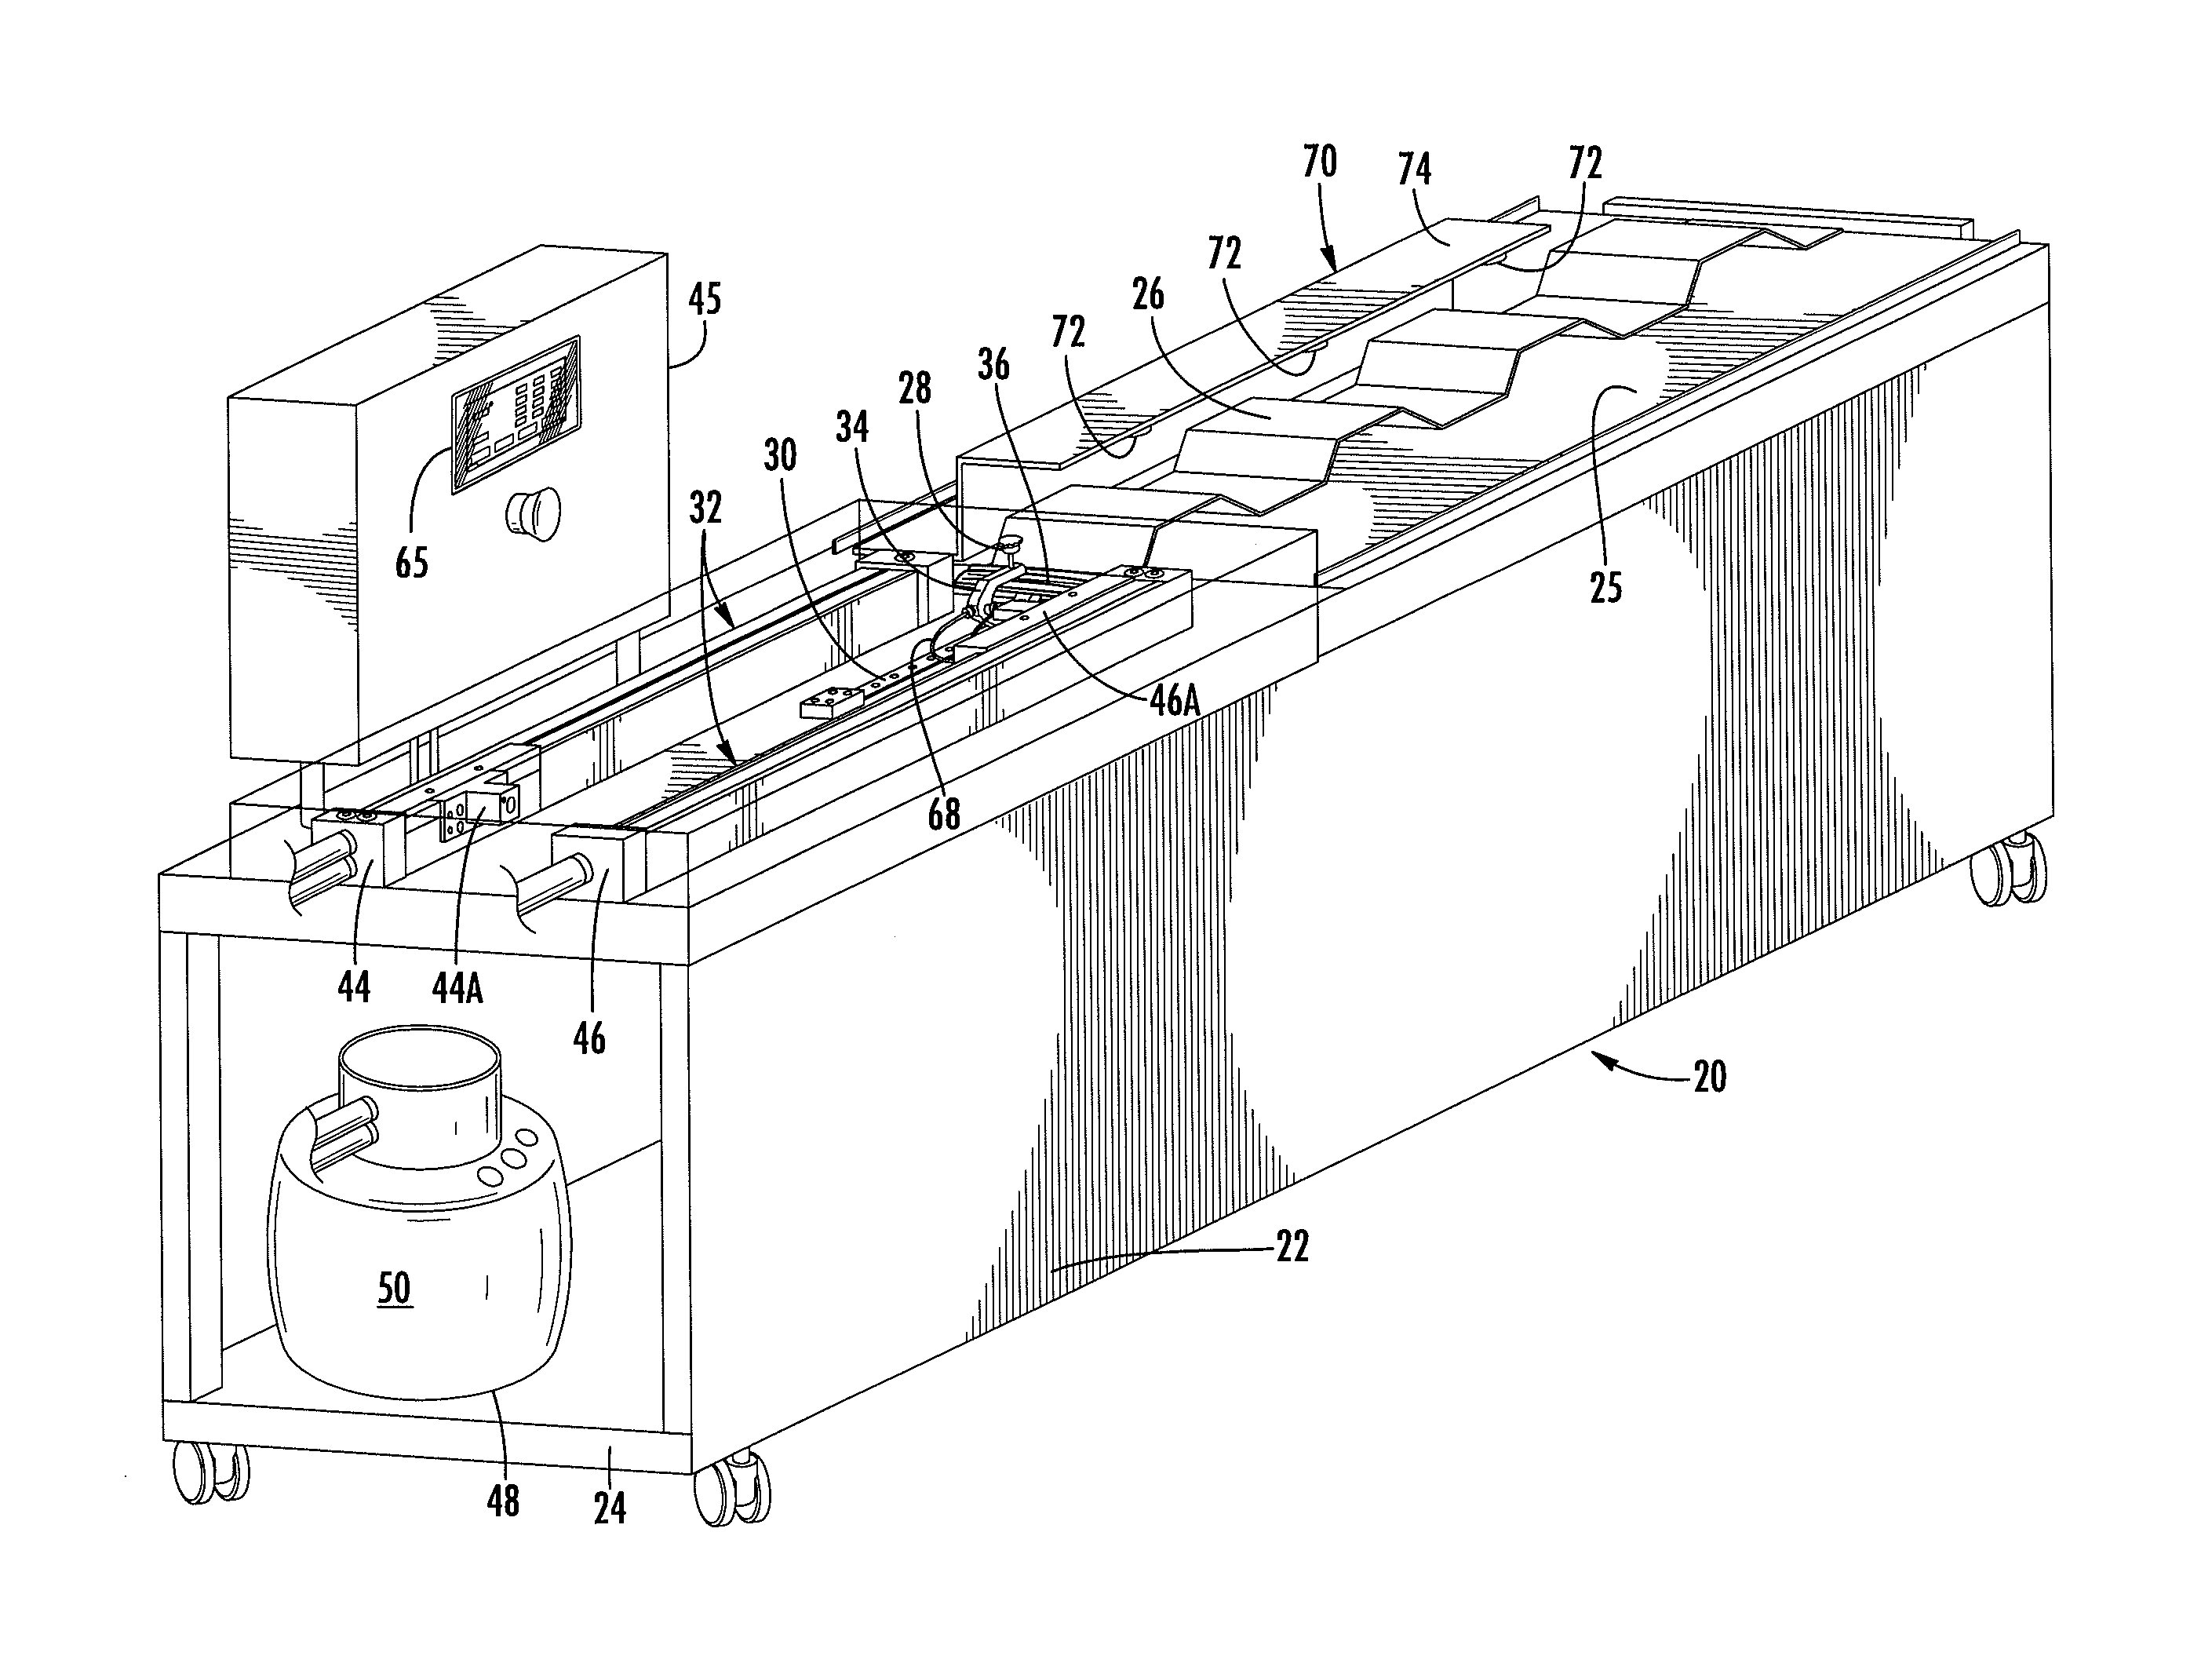 Apparatus for testing adhesion of an adhesive tape to a bonding surface under a load applied to the tape